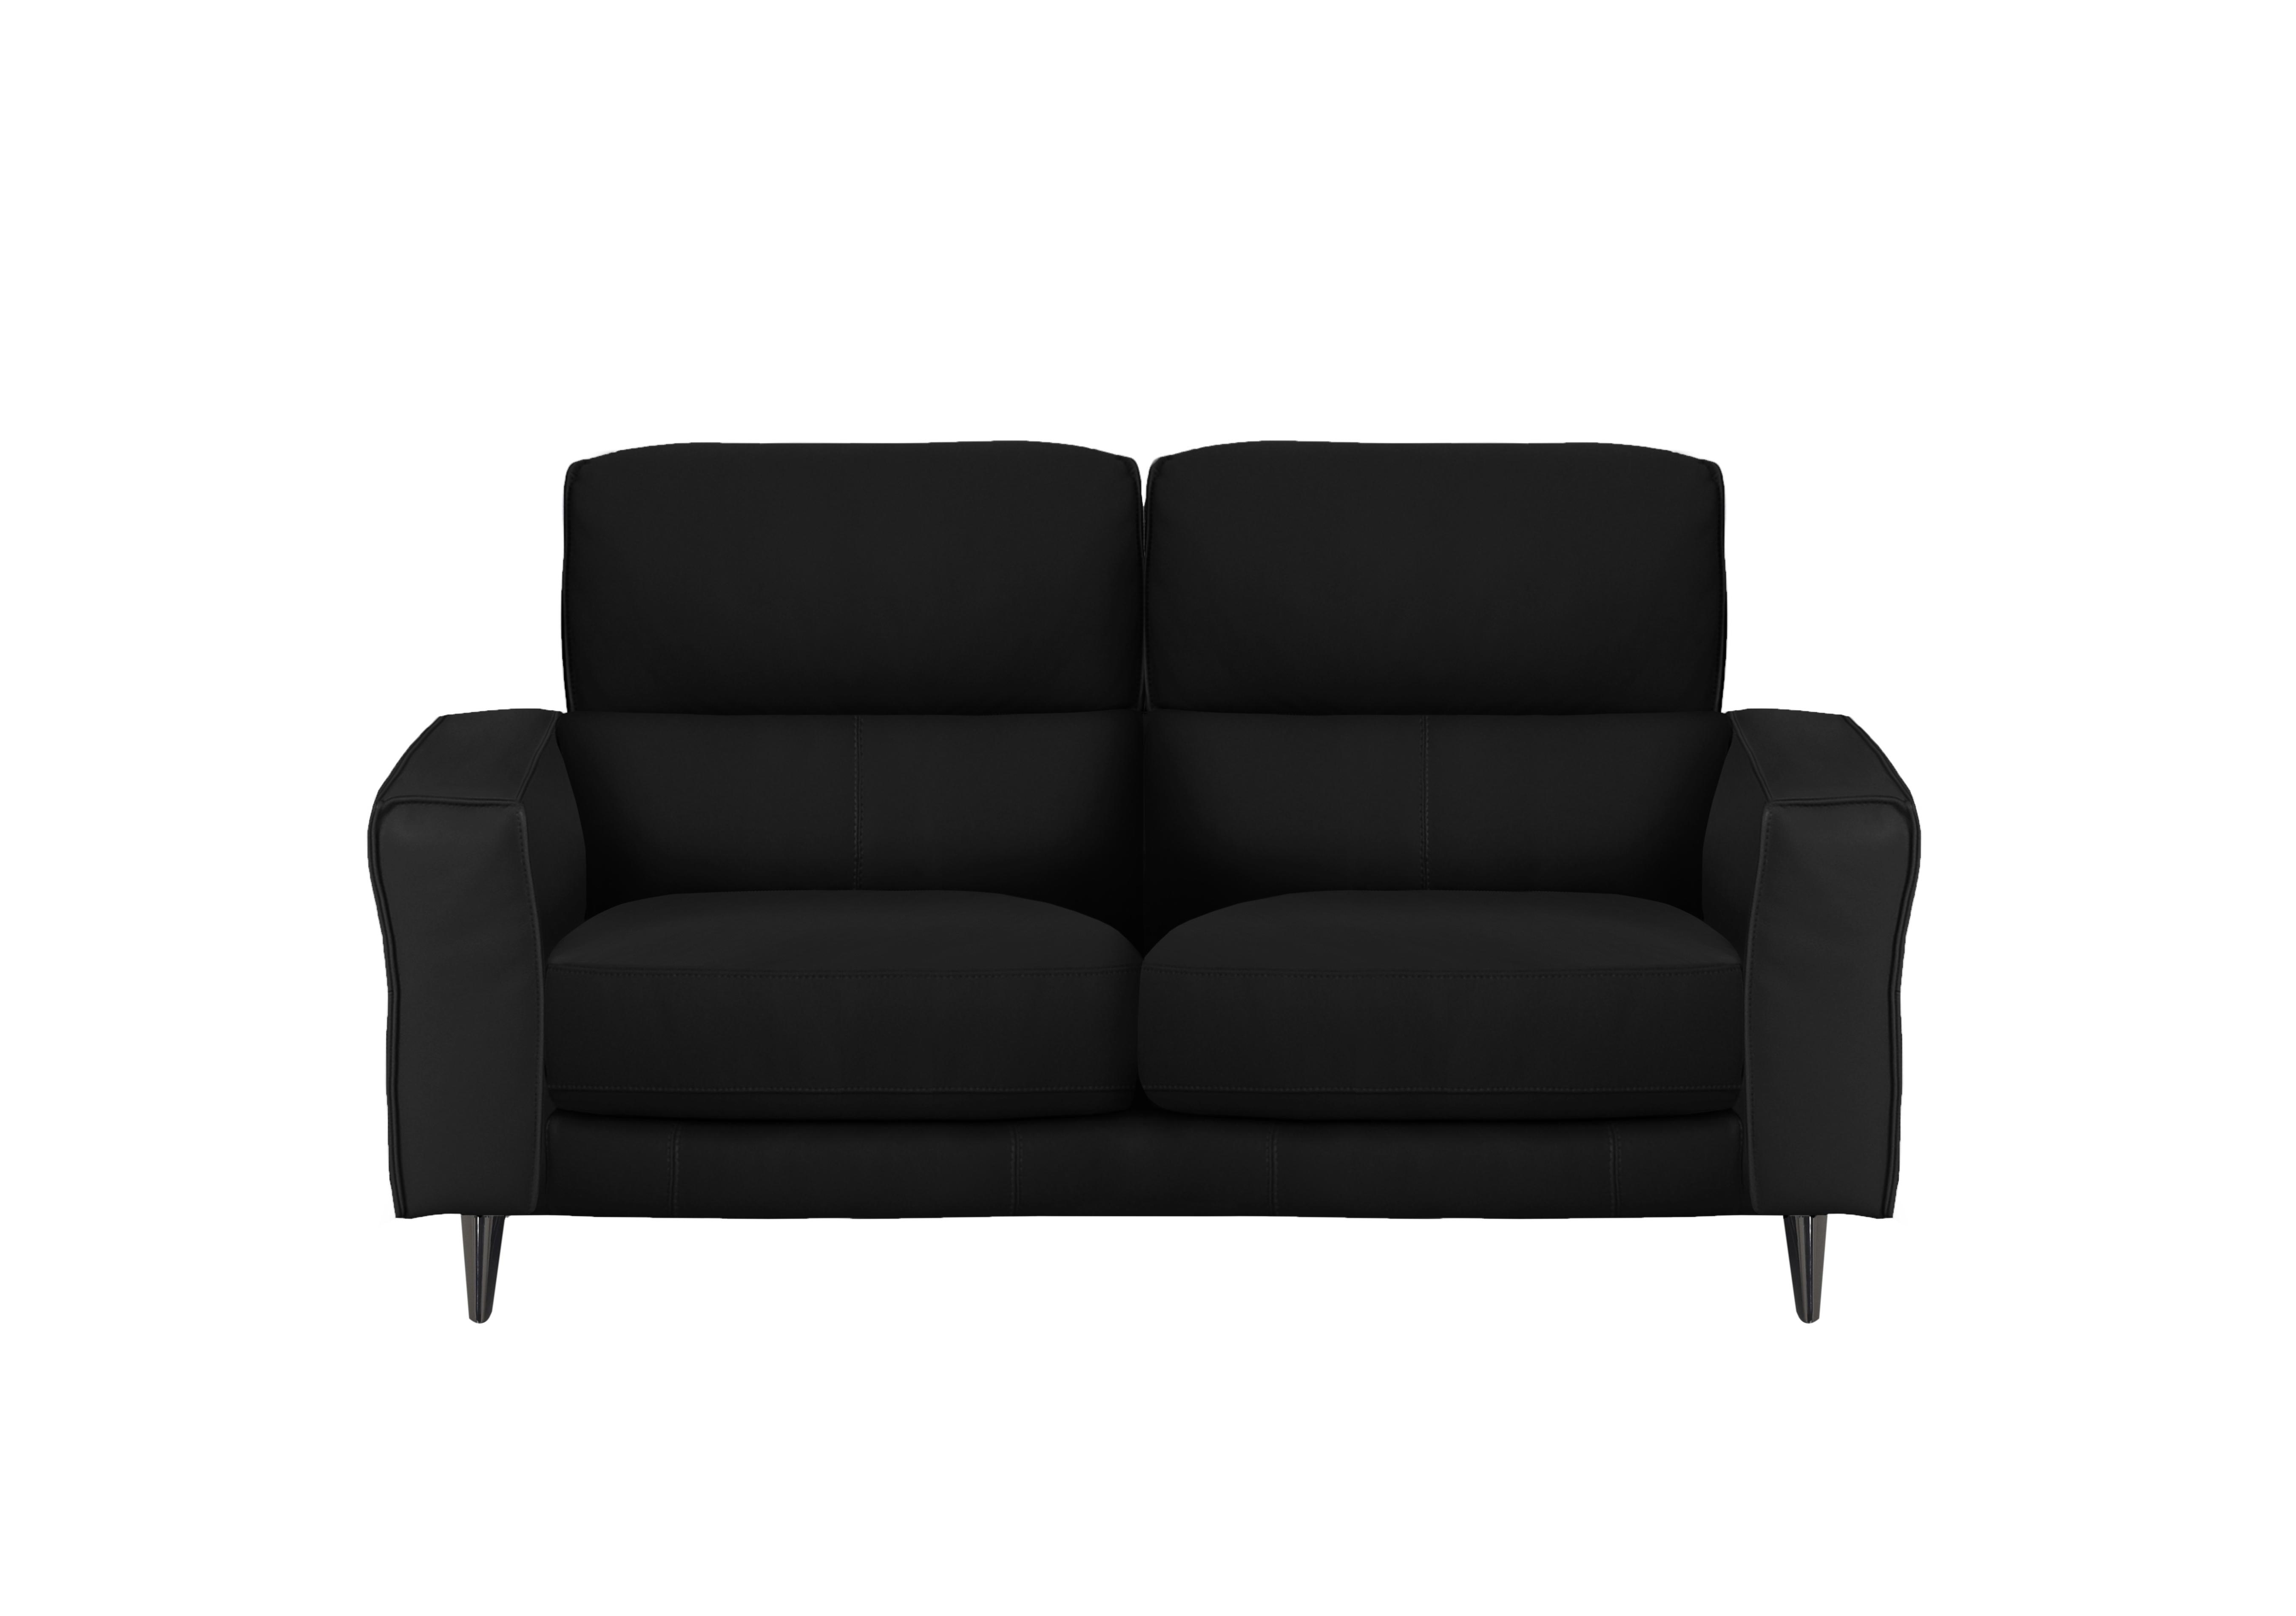 Axel 2 Seater Leather Sofa in Bv-3500 Classic Black on Furniture Village